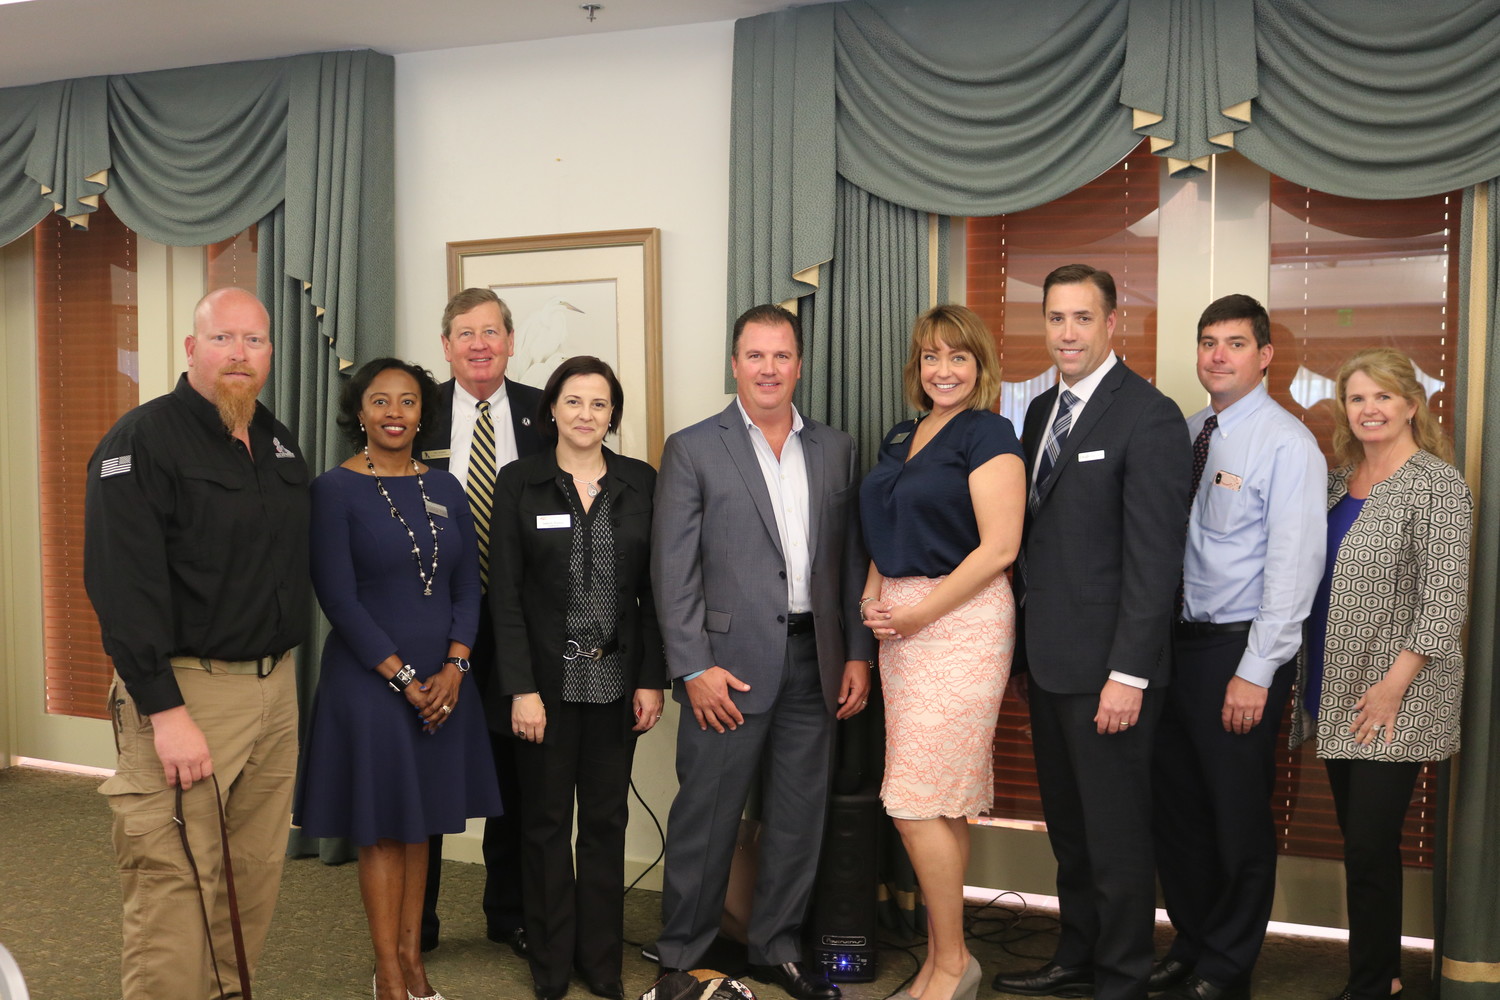 Greg Wells, Felicia Cox, Tim Crosby, Isabelle Renault, Garry Redig, Toni Boudreaux, Brian Zehren, Brandon Starks and Christine Wier gather at the joint Chamber luncheon on Thursday, April 12 at Sawgrass Country Club.